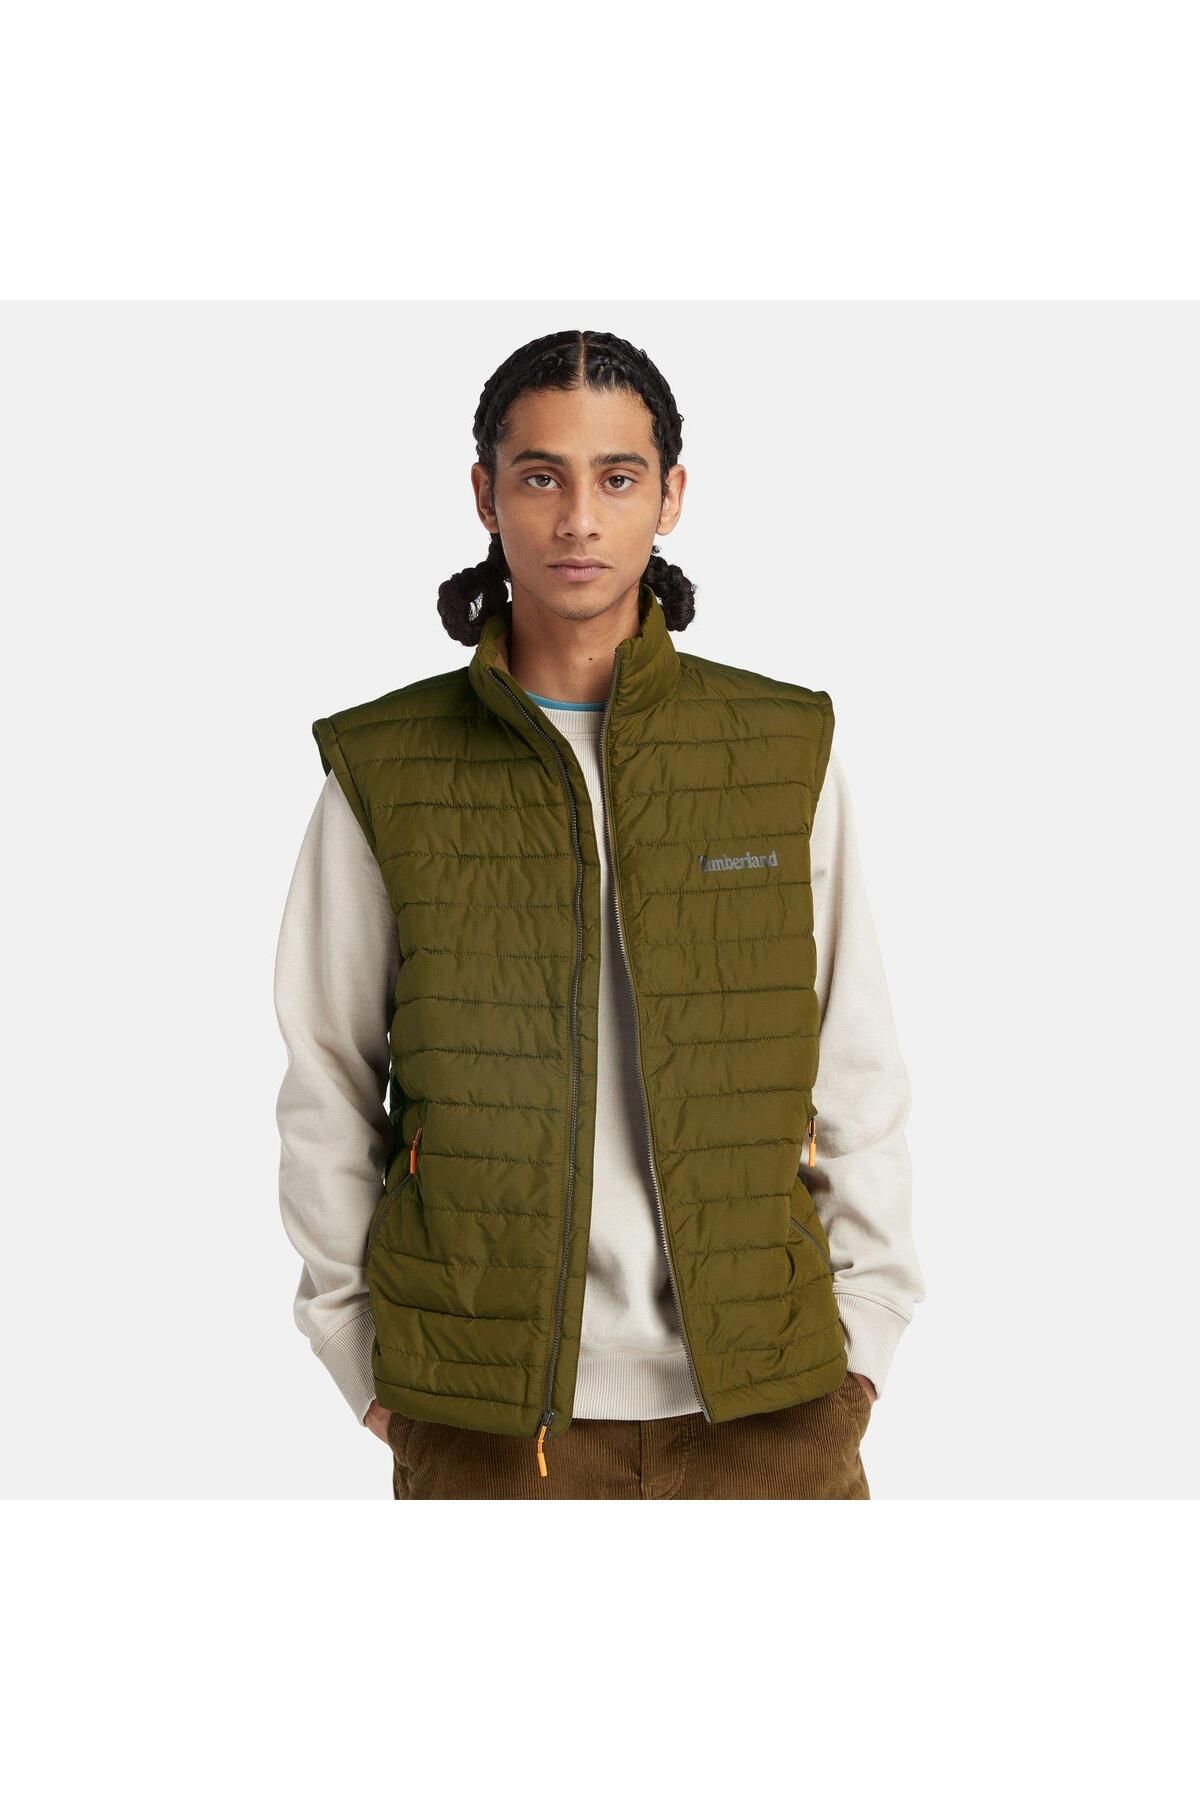 Timberland TİMBERLAND Durable Water Repellent Vest TB0A5XR53021